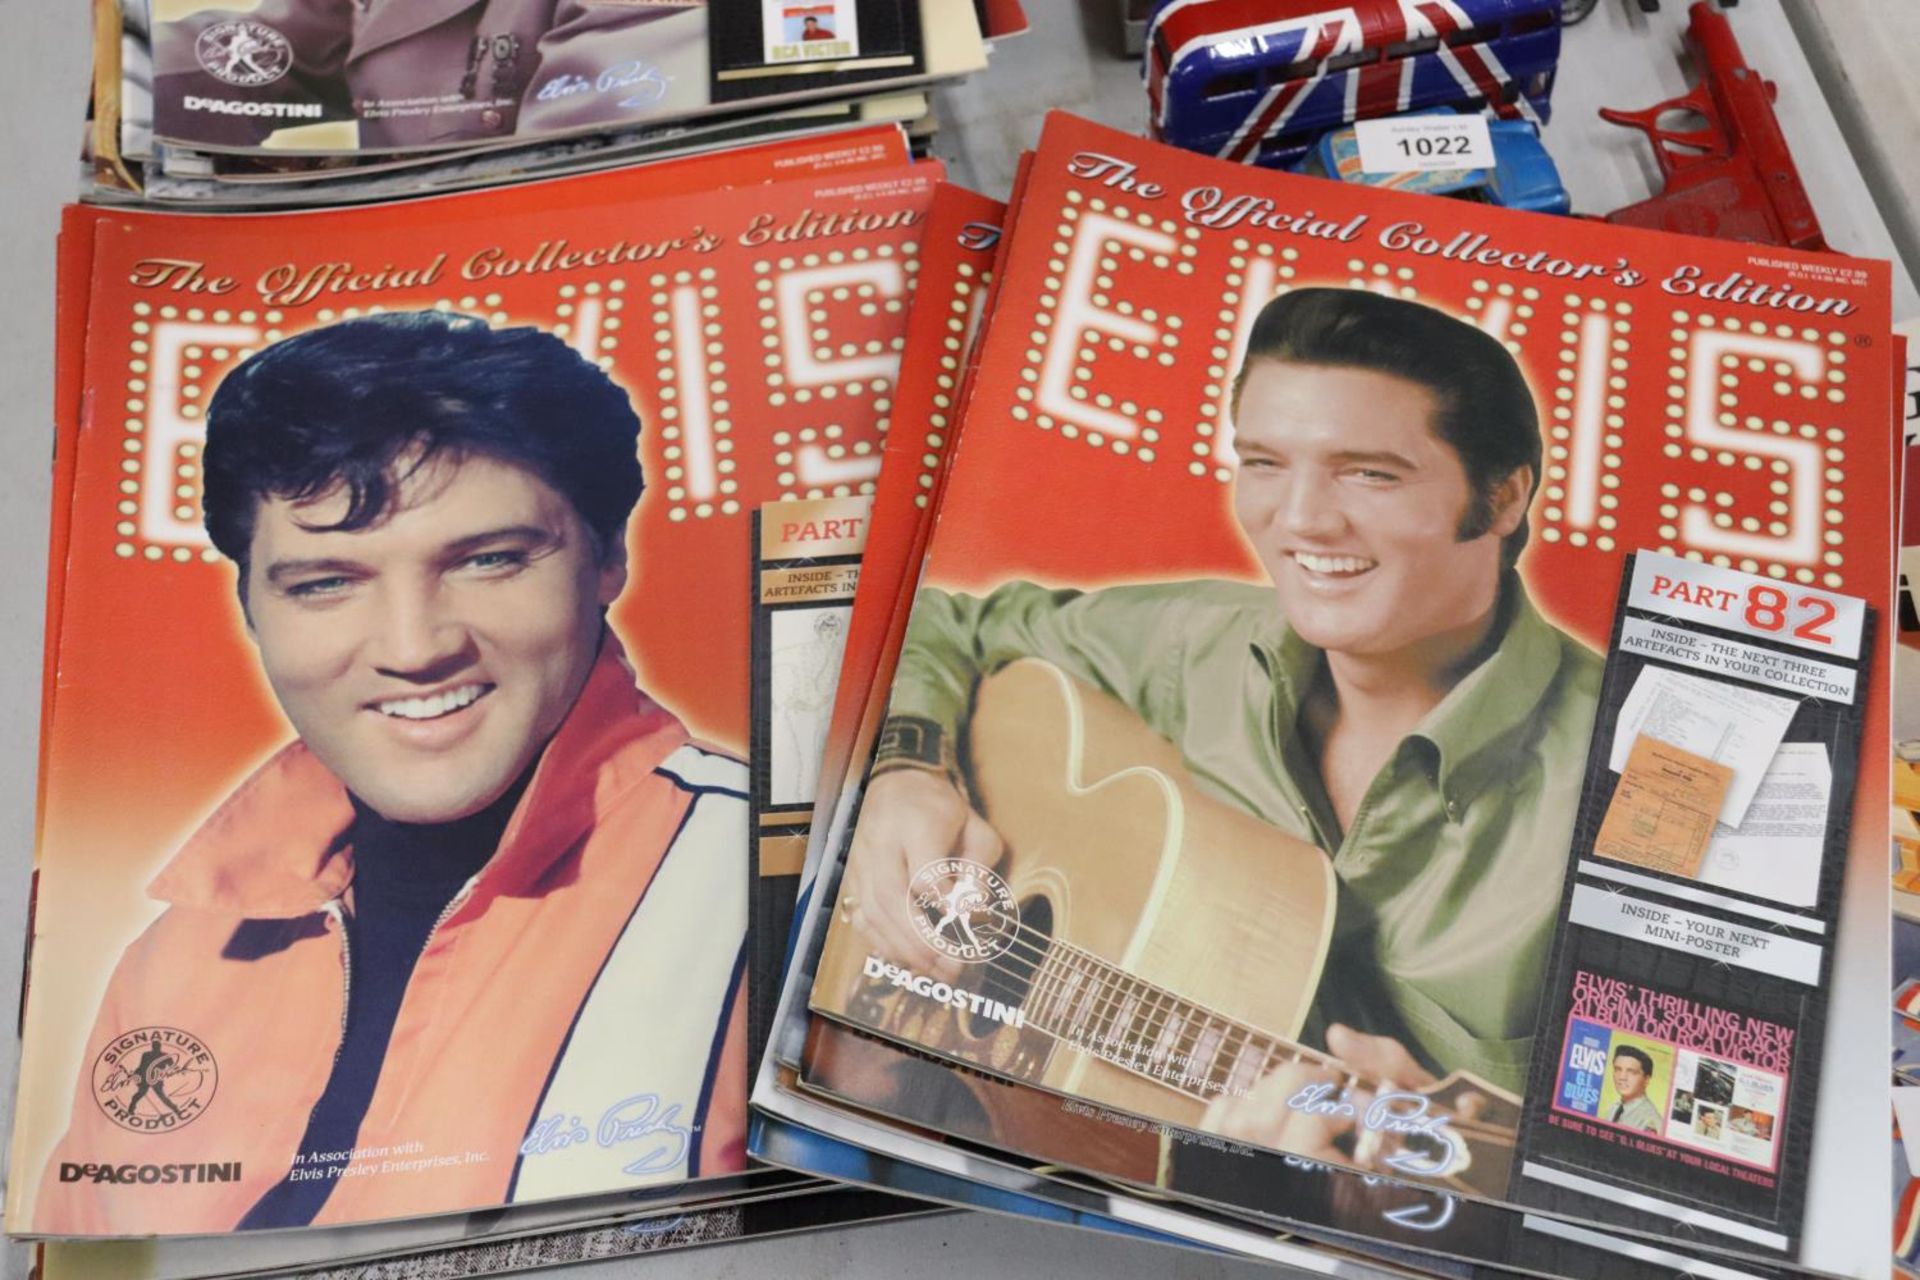 A LARGE QUANTITY OF OFFICIAL COLLECTOR'S EDITIONS, 'ELVIS' BY DEAGOSTINI, IN GOOD CONDITION - Image 5 of 5